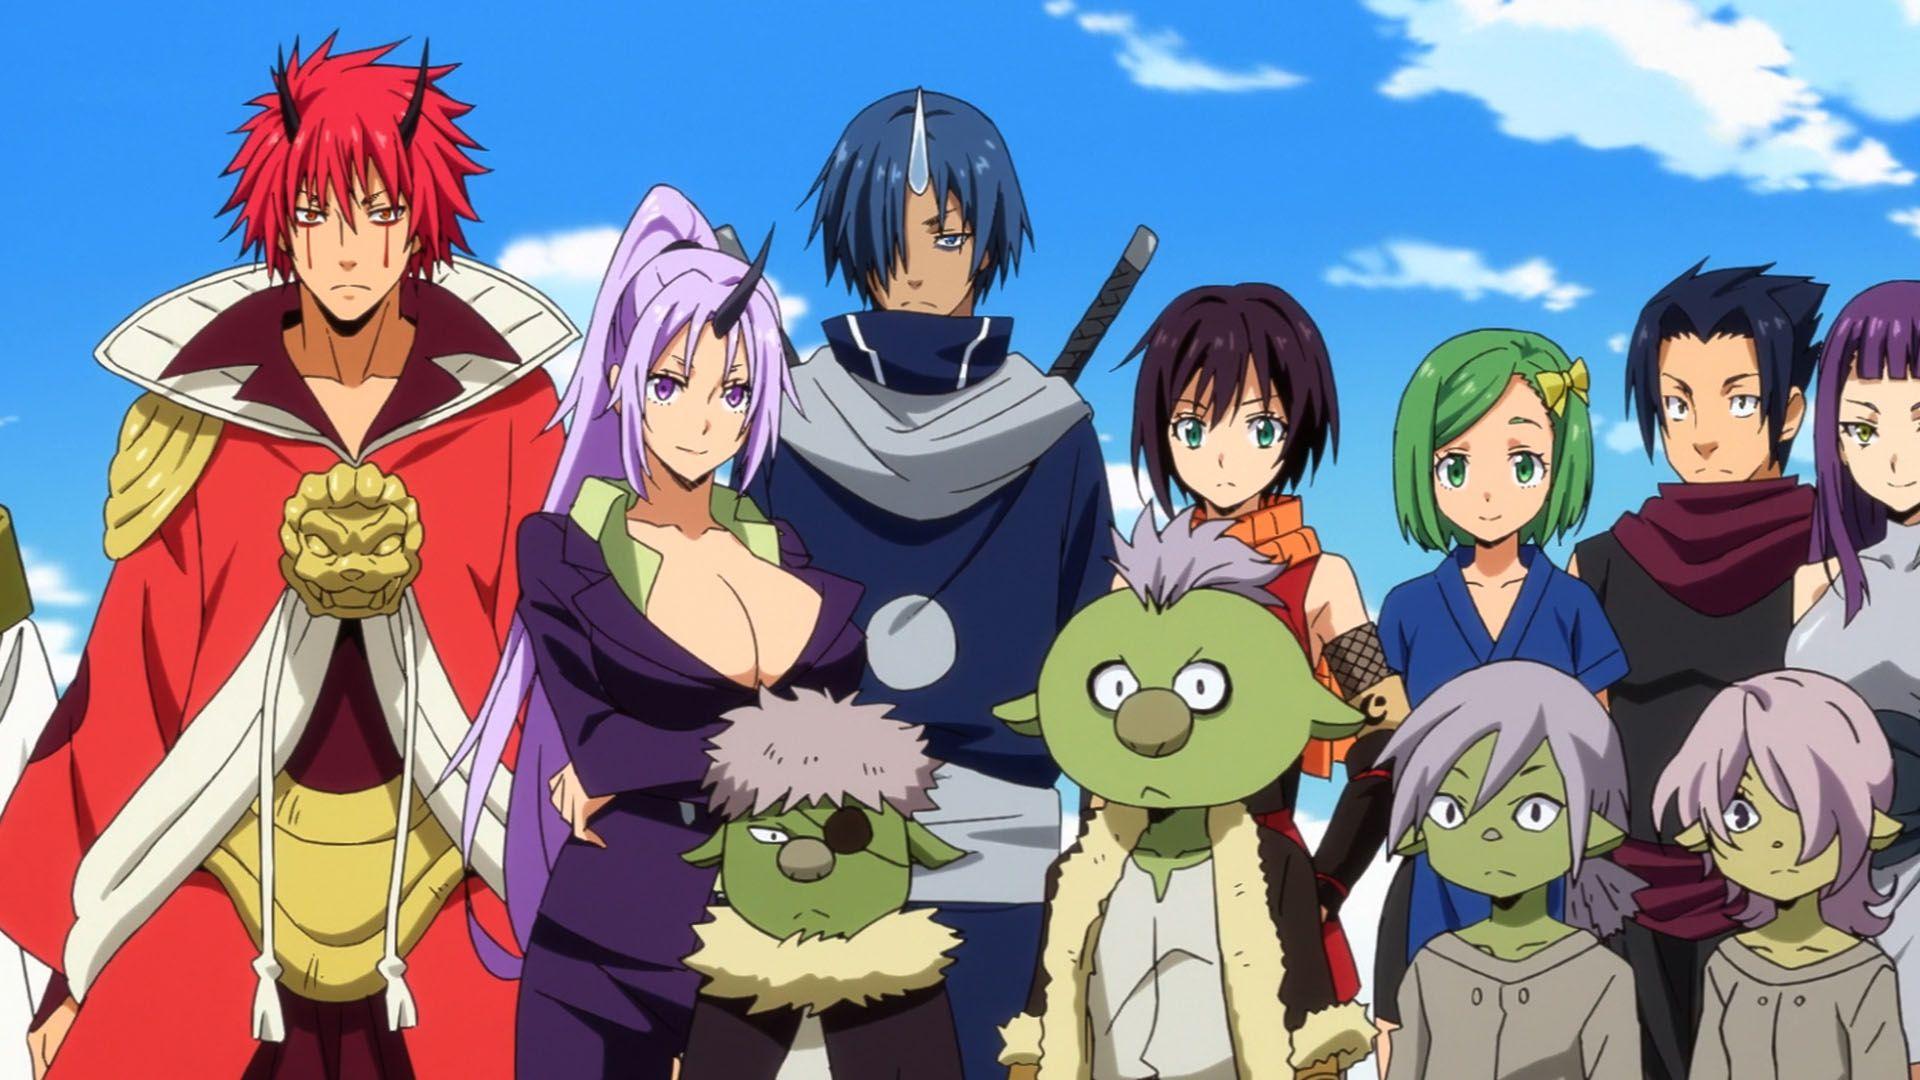 Wallpaper characters, About my reincarnation in slime, That Time I Got  Reincarnated as a Slime, Tensei Shitara Slime Datta Ken for mobile and  desktop, section сёнэн, resolution 1920x1080 - download